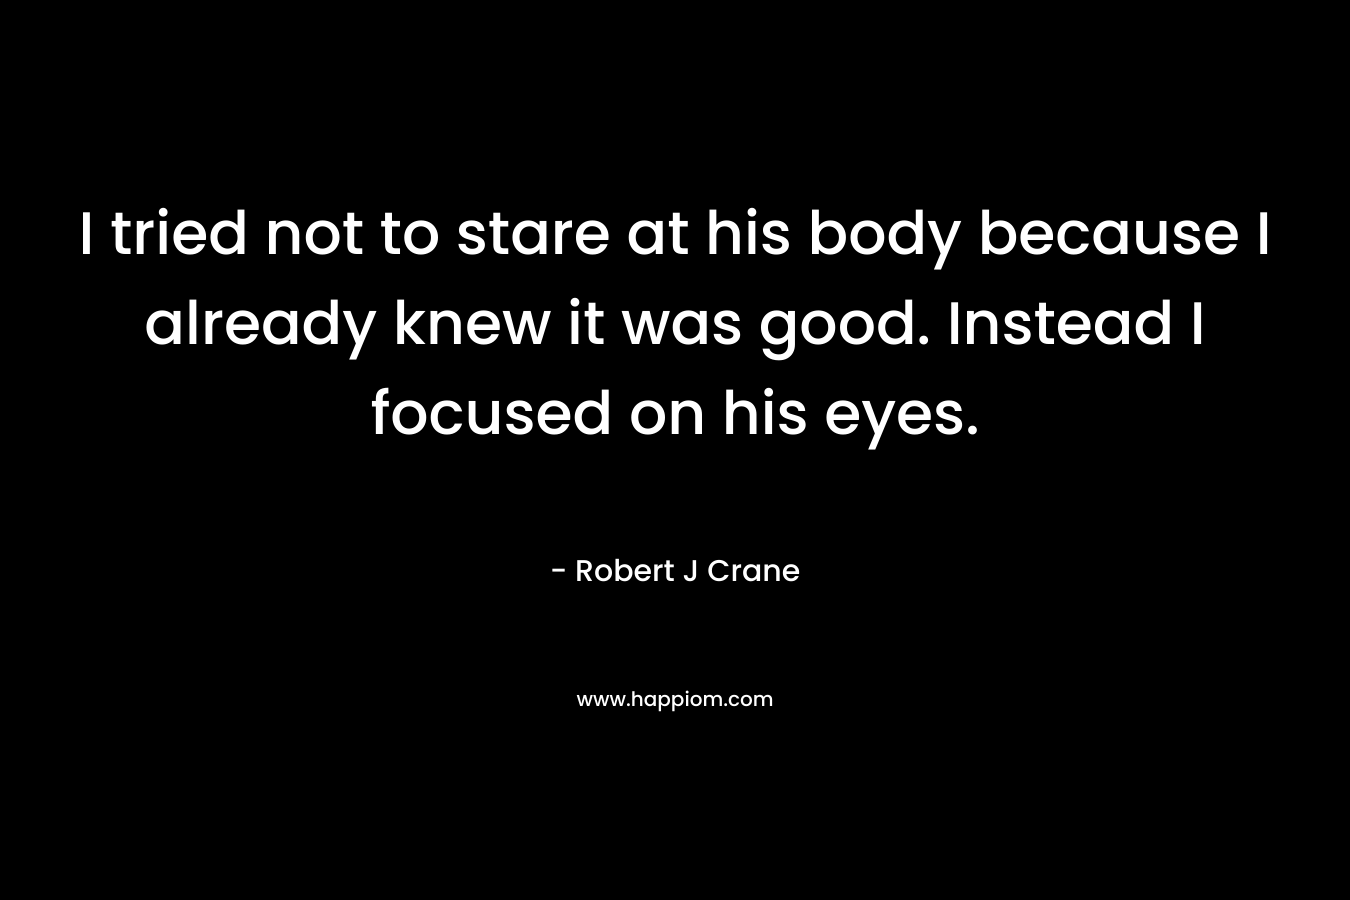 I tried not to stare at his body because I already knew it was good. Instead I focused on his eyes. – Robert J Crane